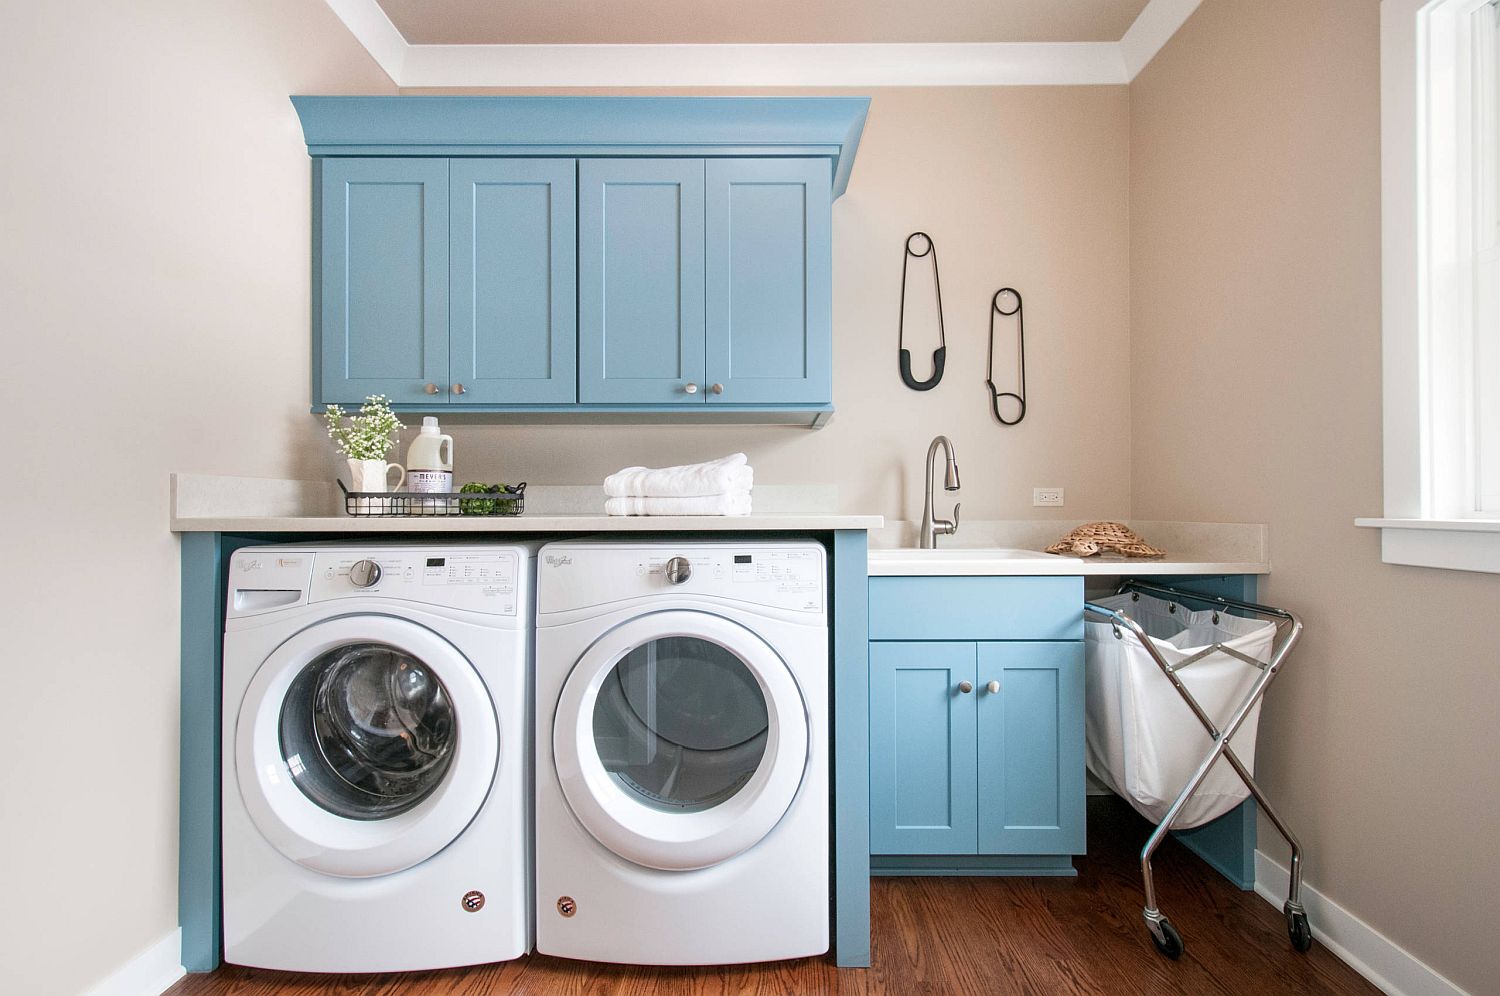 Gorgeous Bespoke Utility Room with Blue Cabinets